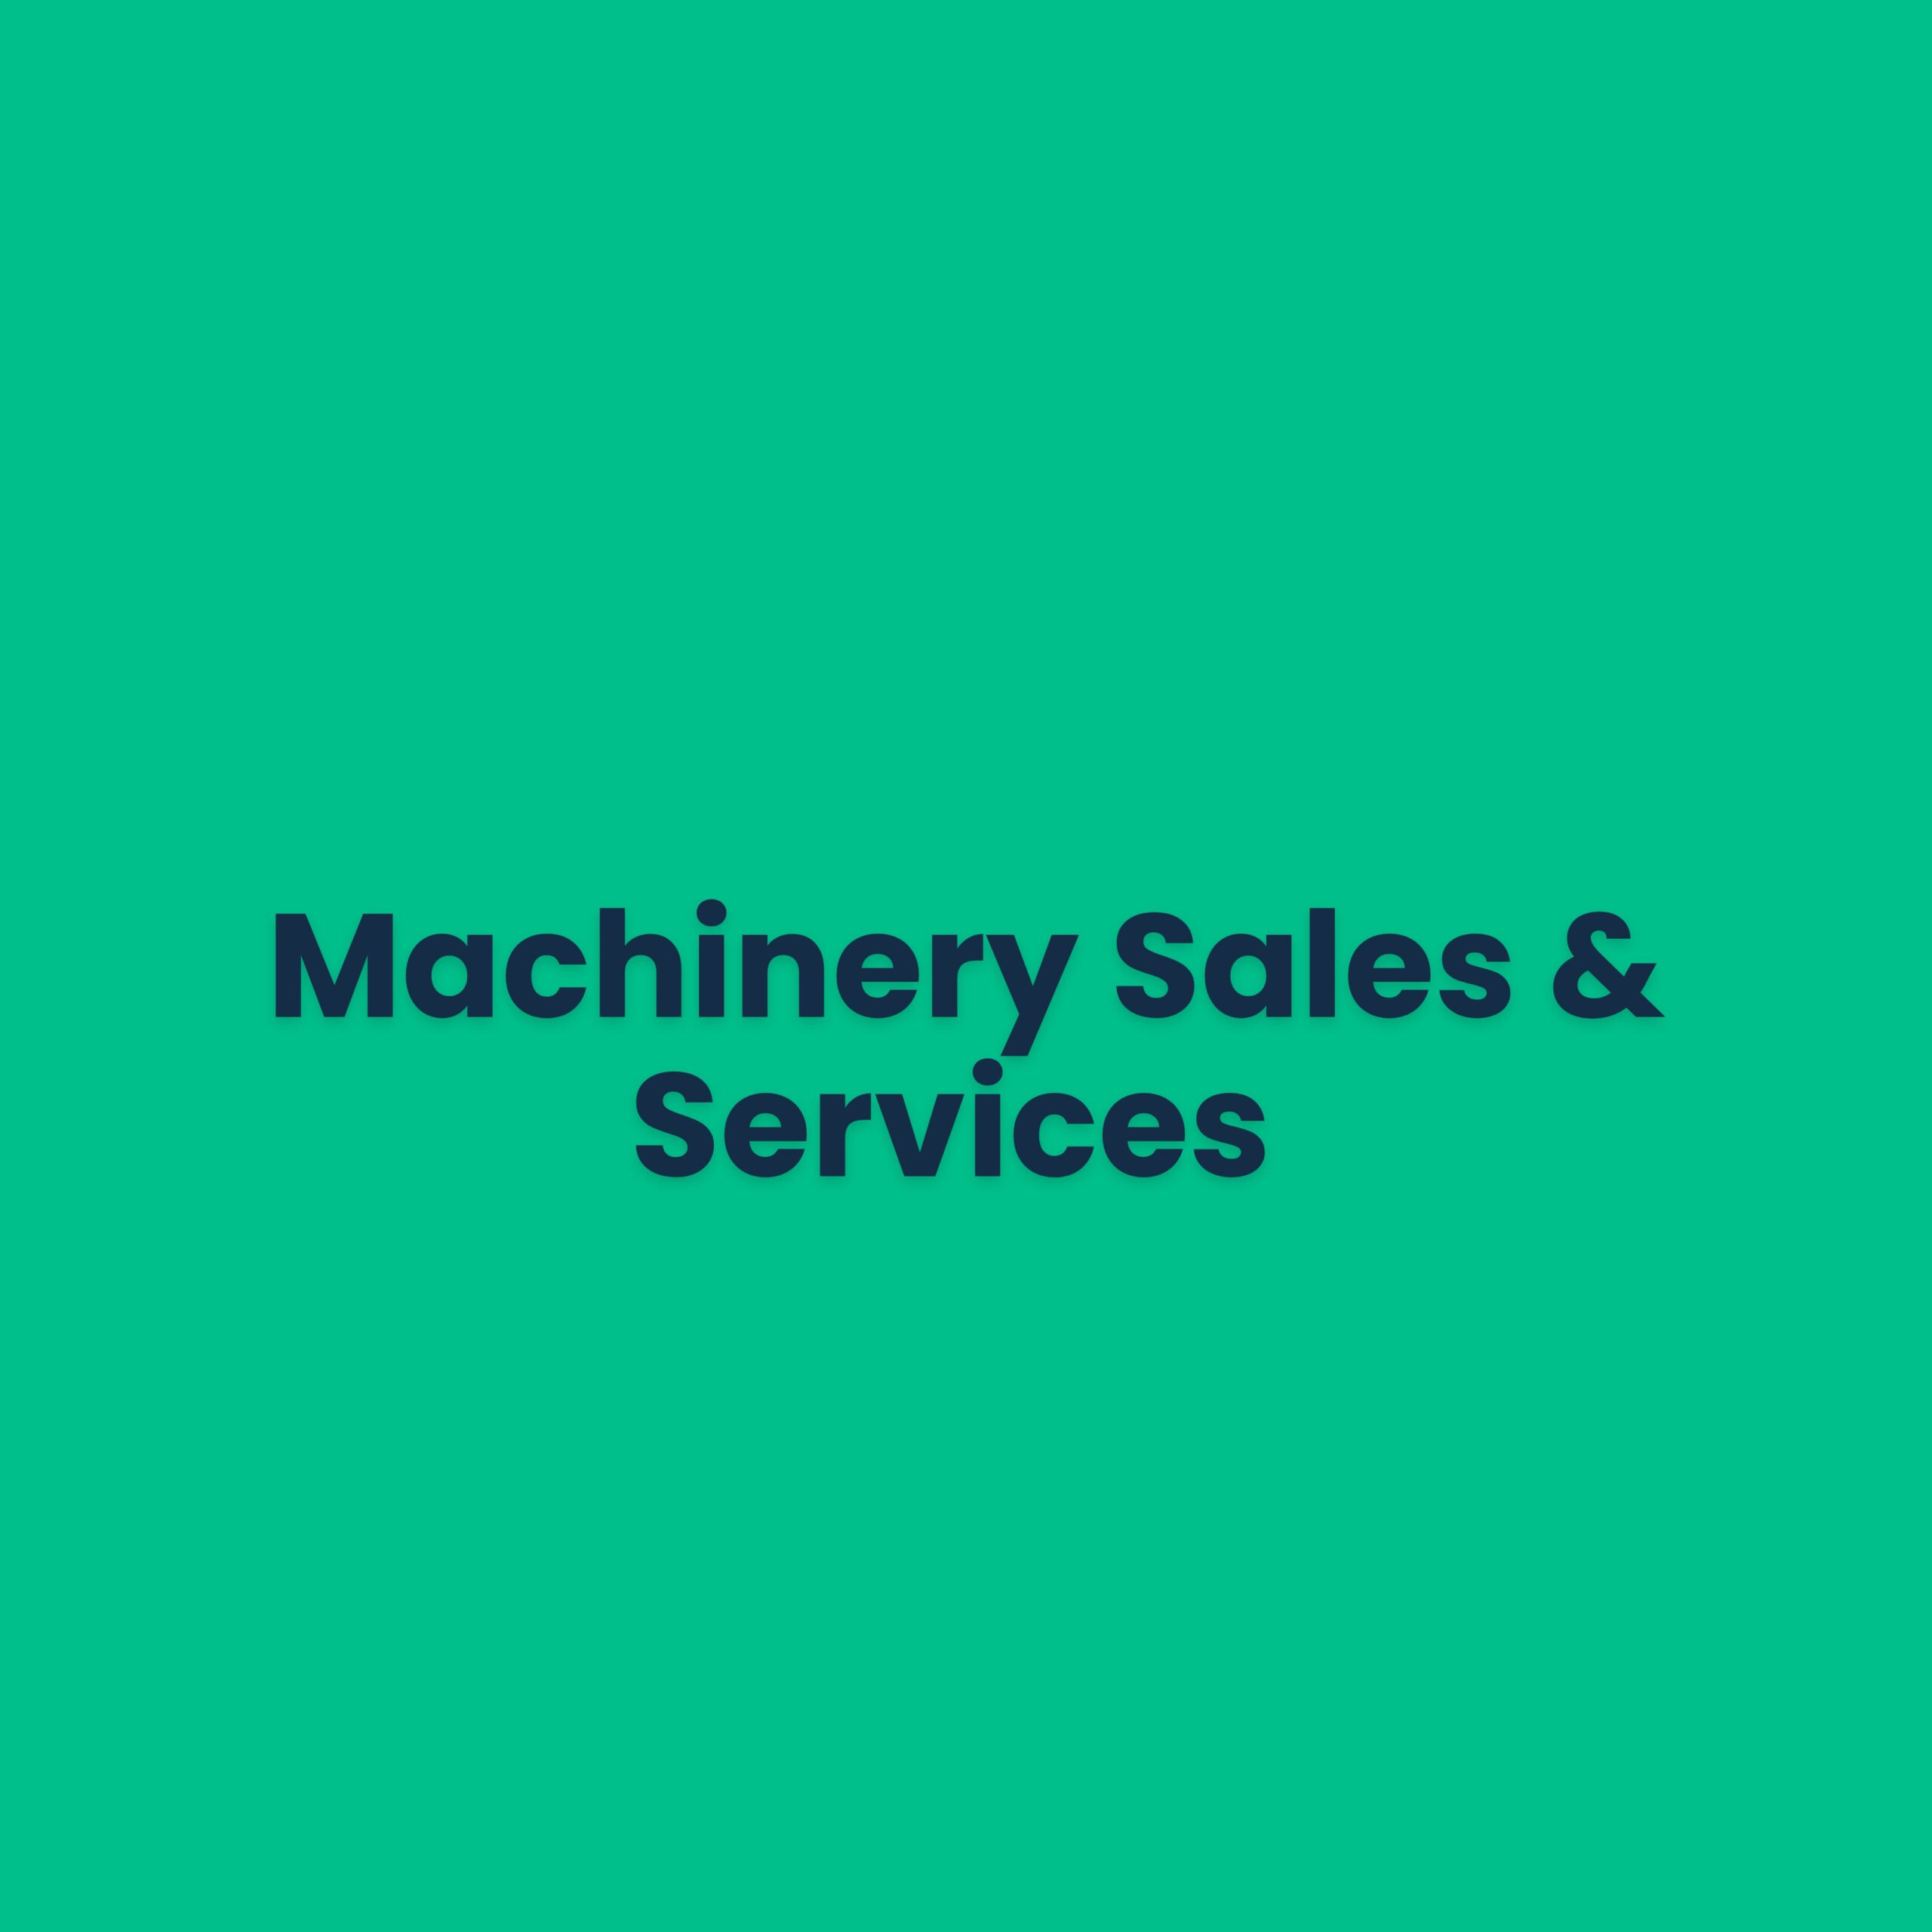 Machinery Sales & Services